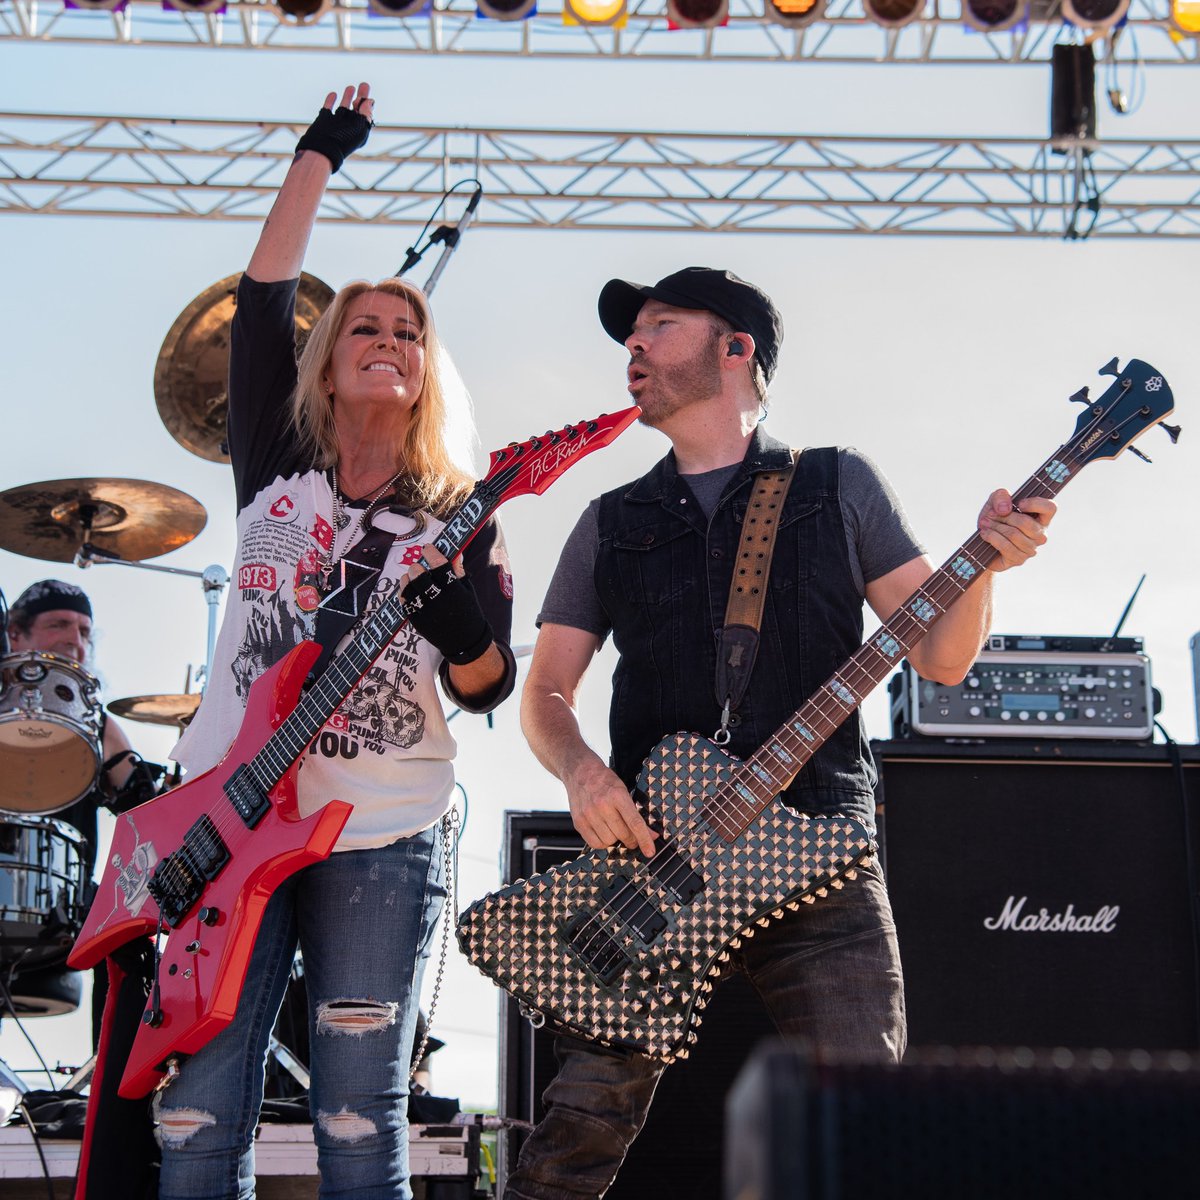 More cool shots from our first show back. (@LitaFord in Sunbury, PA)  What a great weekend. And we get to do it all over again this weekend.  You can find more tour dates at: MartyOBrien.com.

Photos by Shannon Wilk.  View the full gallery here: rockininterviews.com/concert-review…